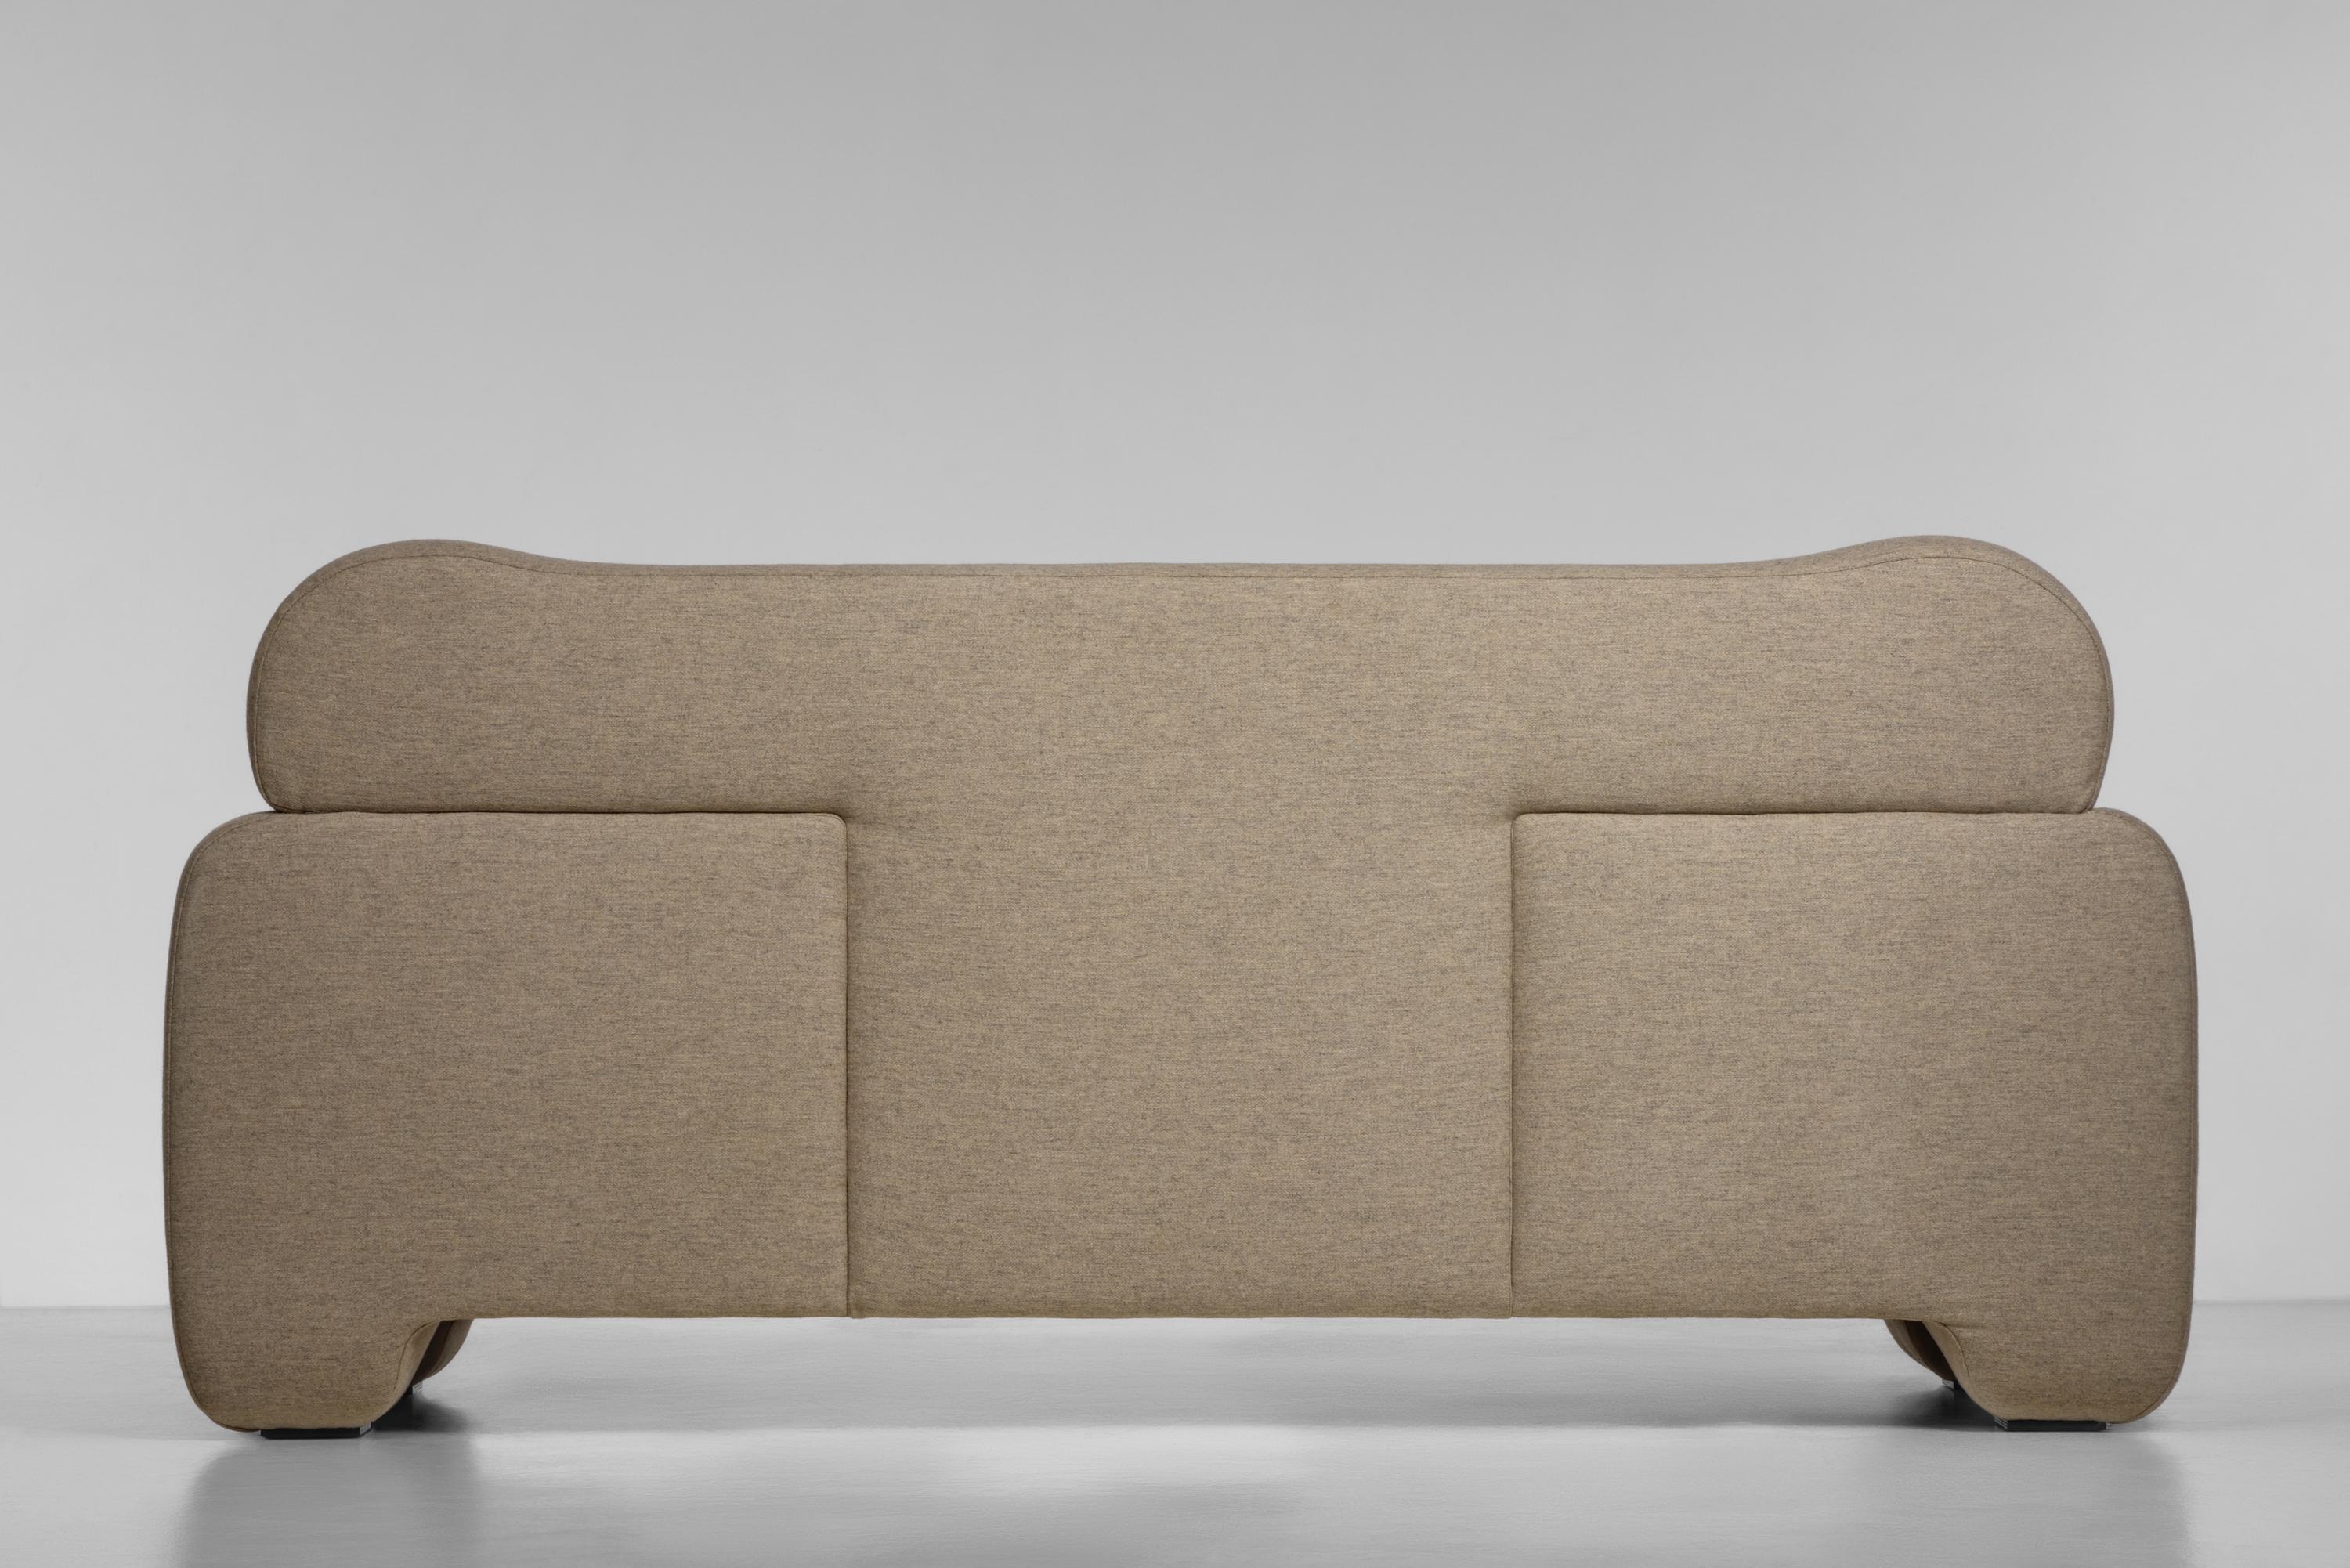 Fluffy Sofa by FAINA
Design: Victoriya Yakusha
Material: Textiles, Foam rubber, Sintepon, Wood
Dimensions: 180 × 84 × 90 cm, 35 Kg 

w 240 cm available, please contact us.

In search of new-old design messages, Victoria Yakusha conducted a study of